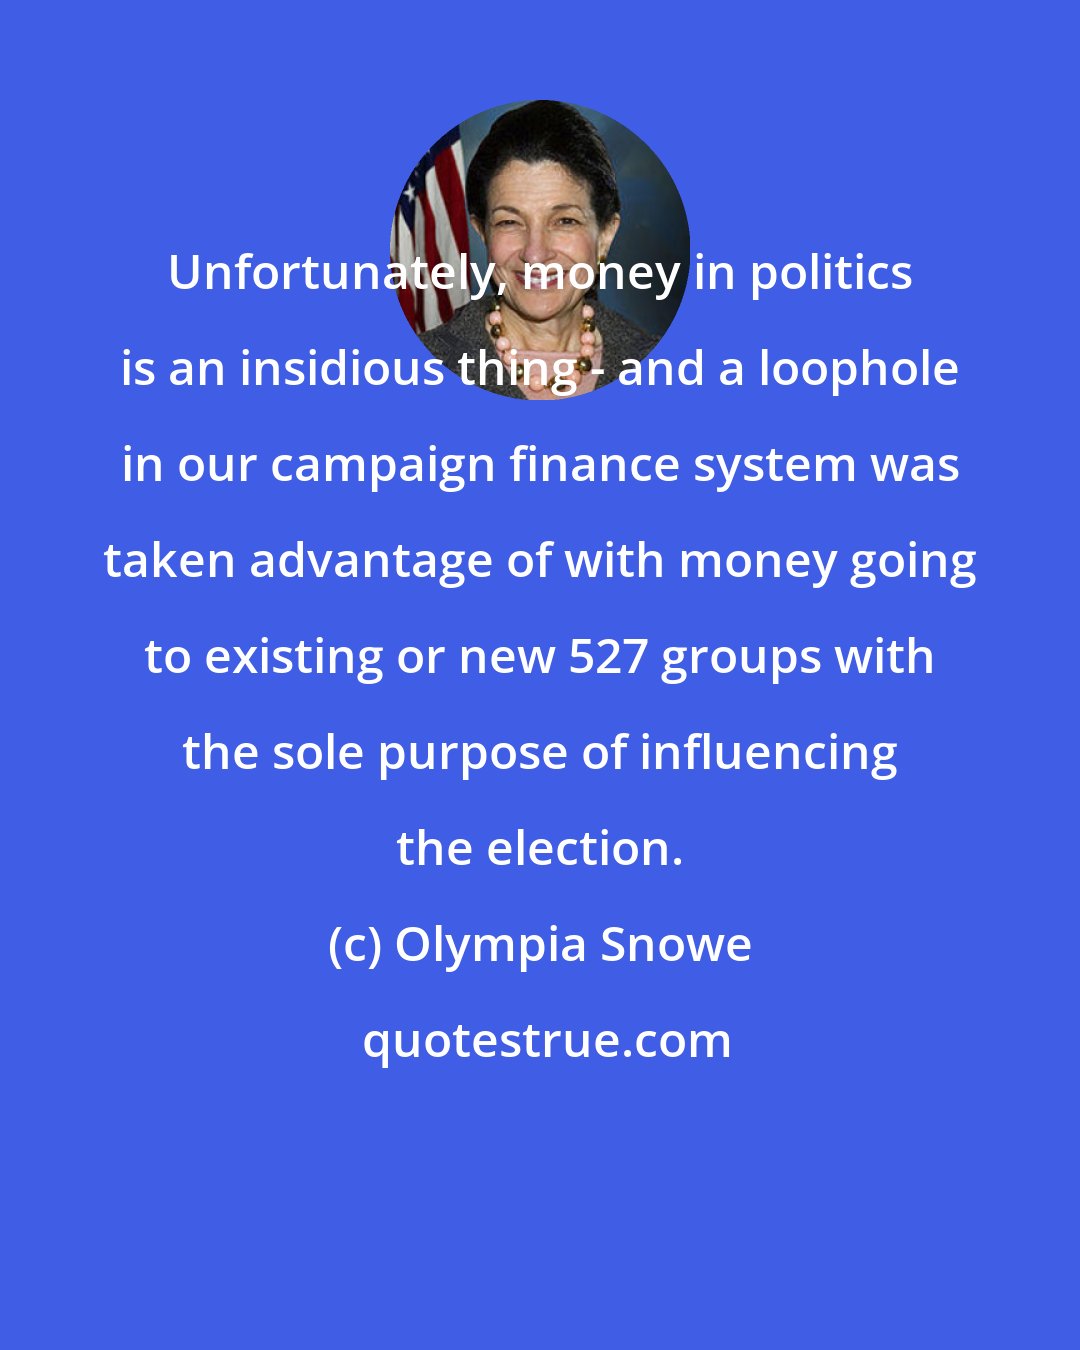 Olympia Snowe: Unfortunately, money in politics is an insidious thing - and a loophole in our campaign finance system was taken advantage of with money going to existing or new 527 groups with the sole purpose of influencing the election.